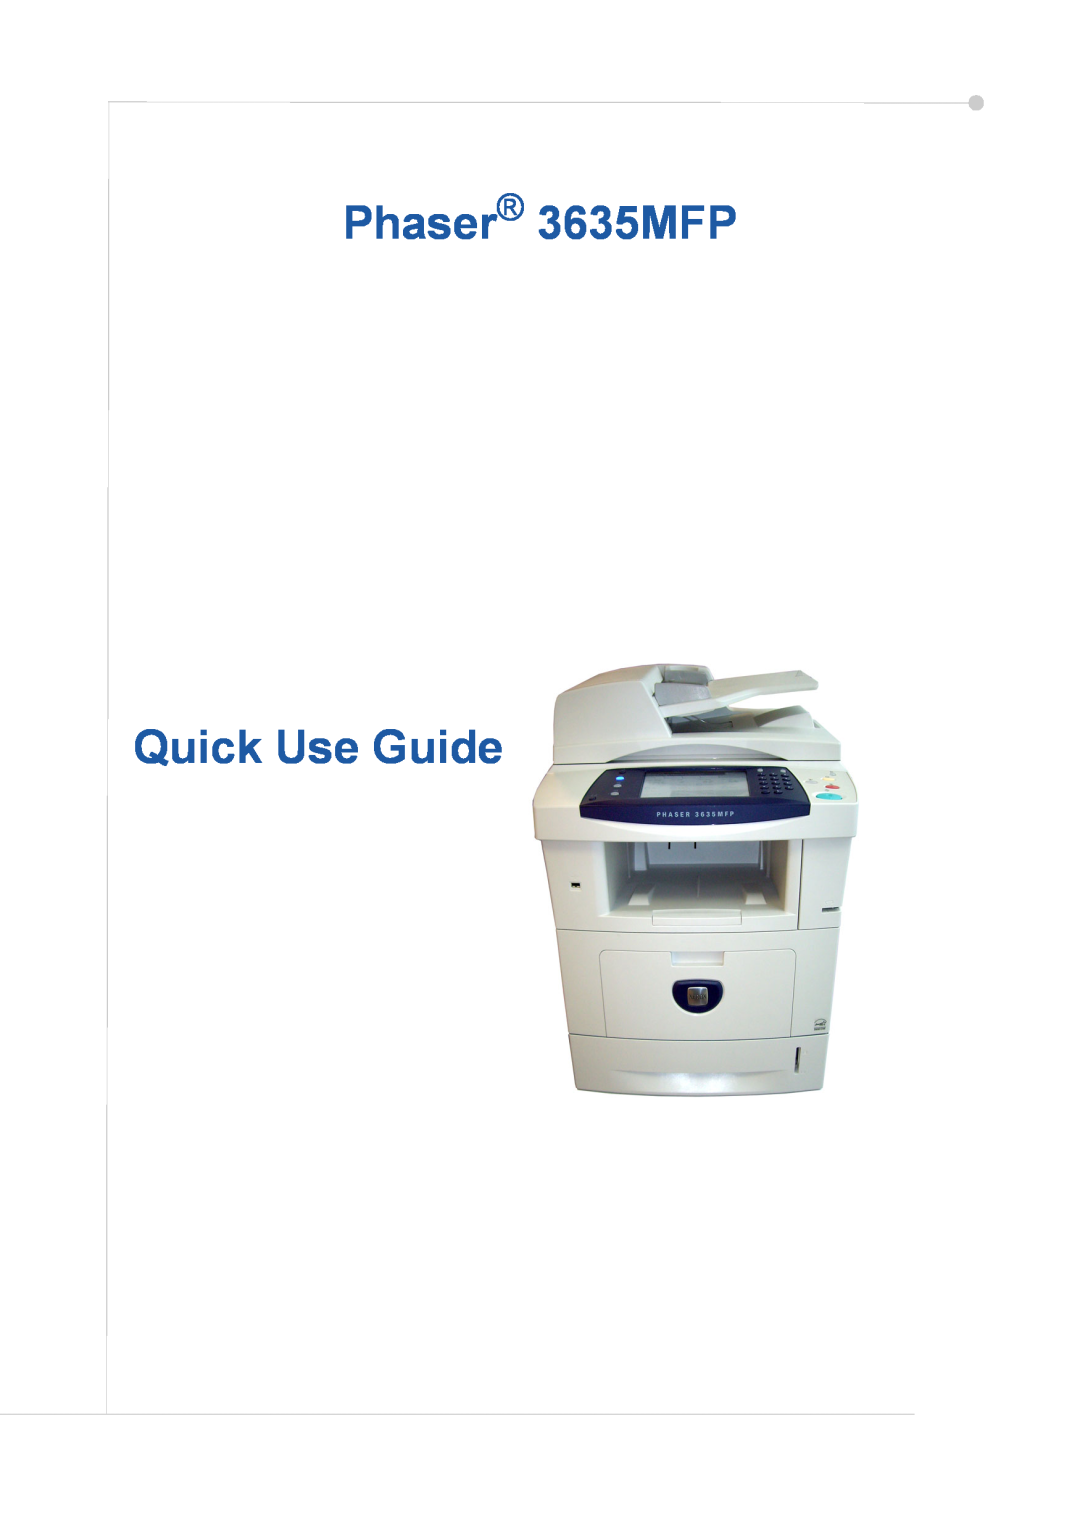 Xerox manual Phaser 3635MFP Quick Use Guide 